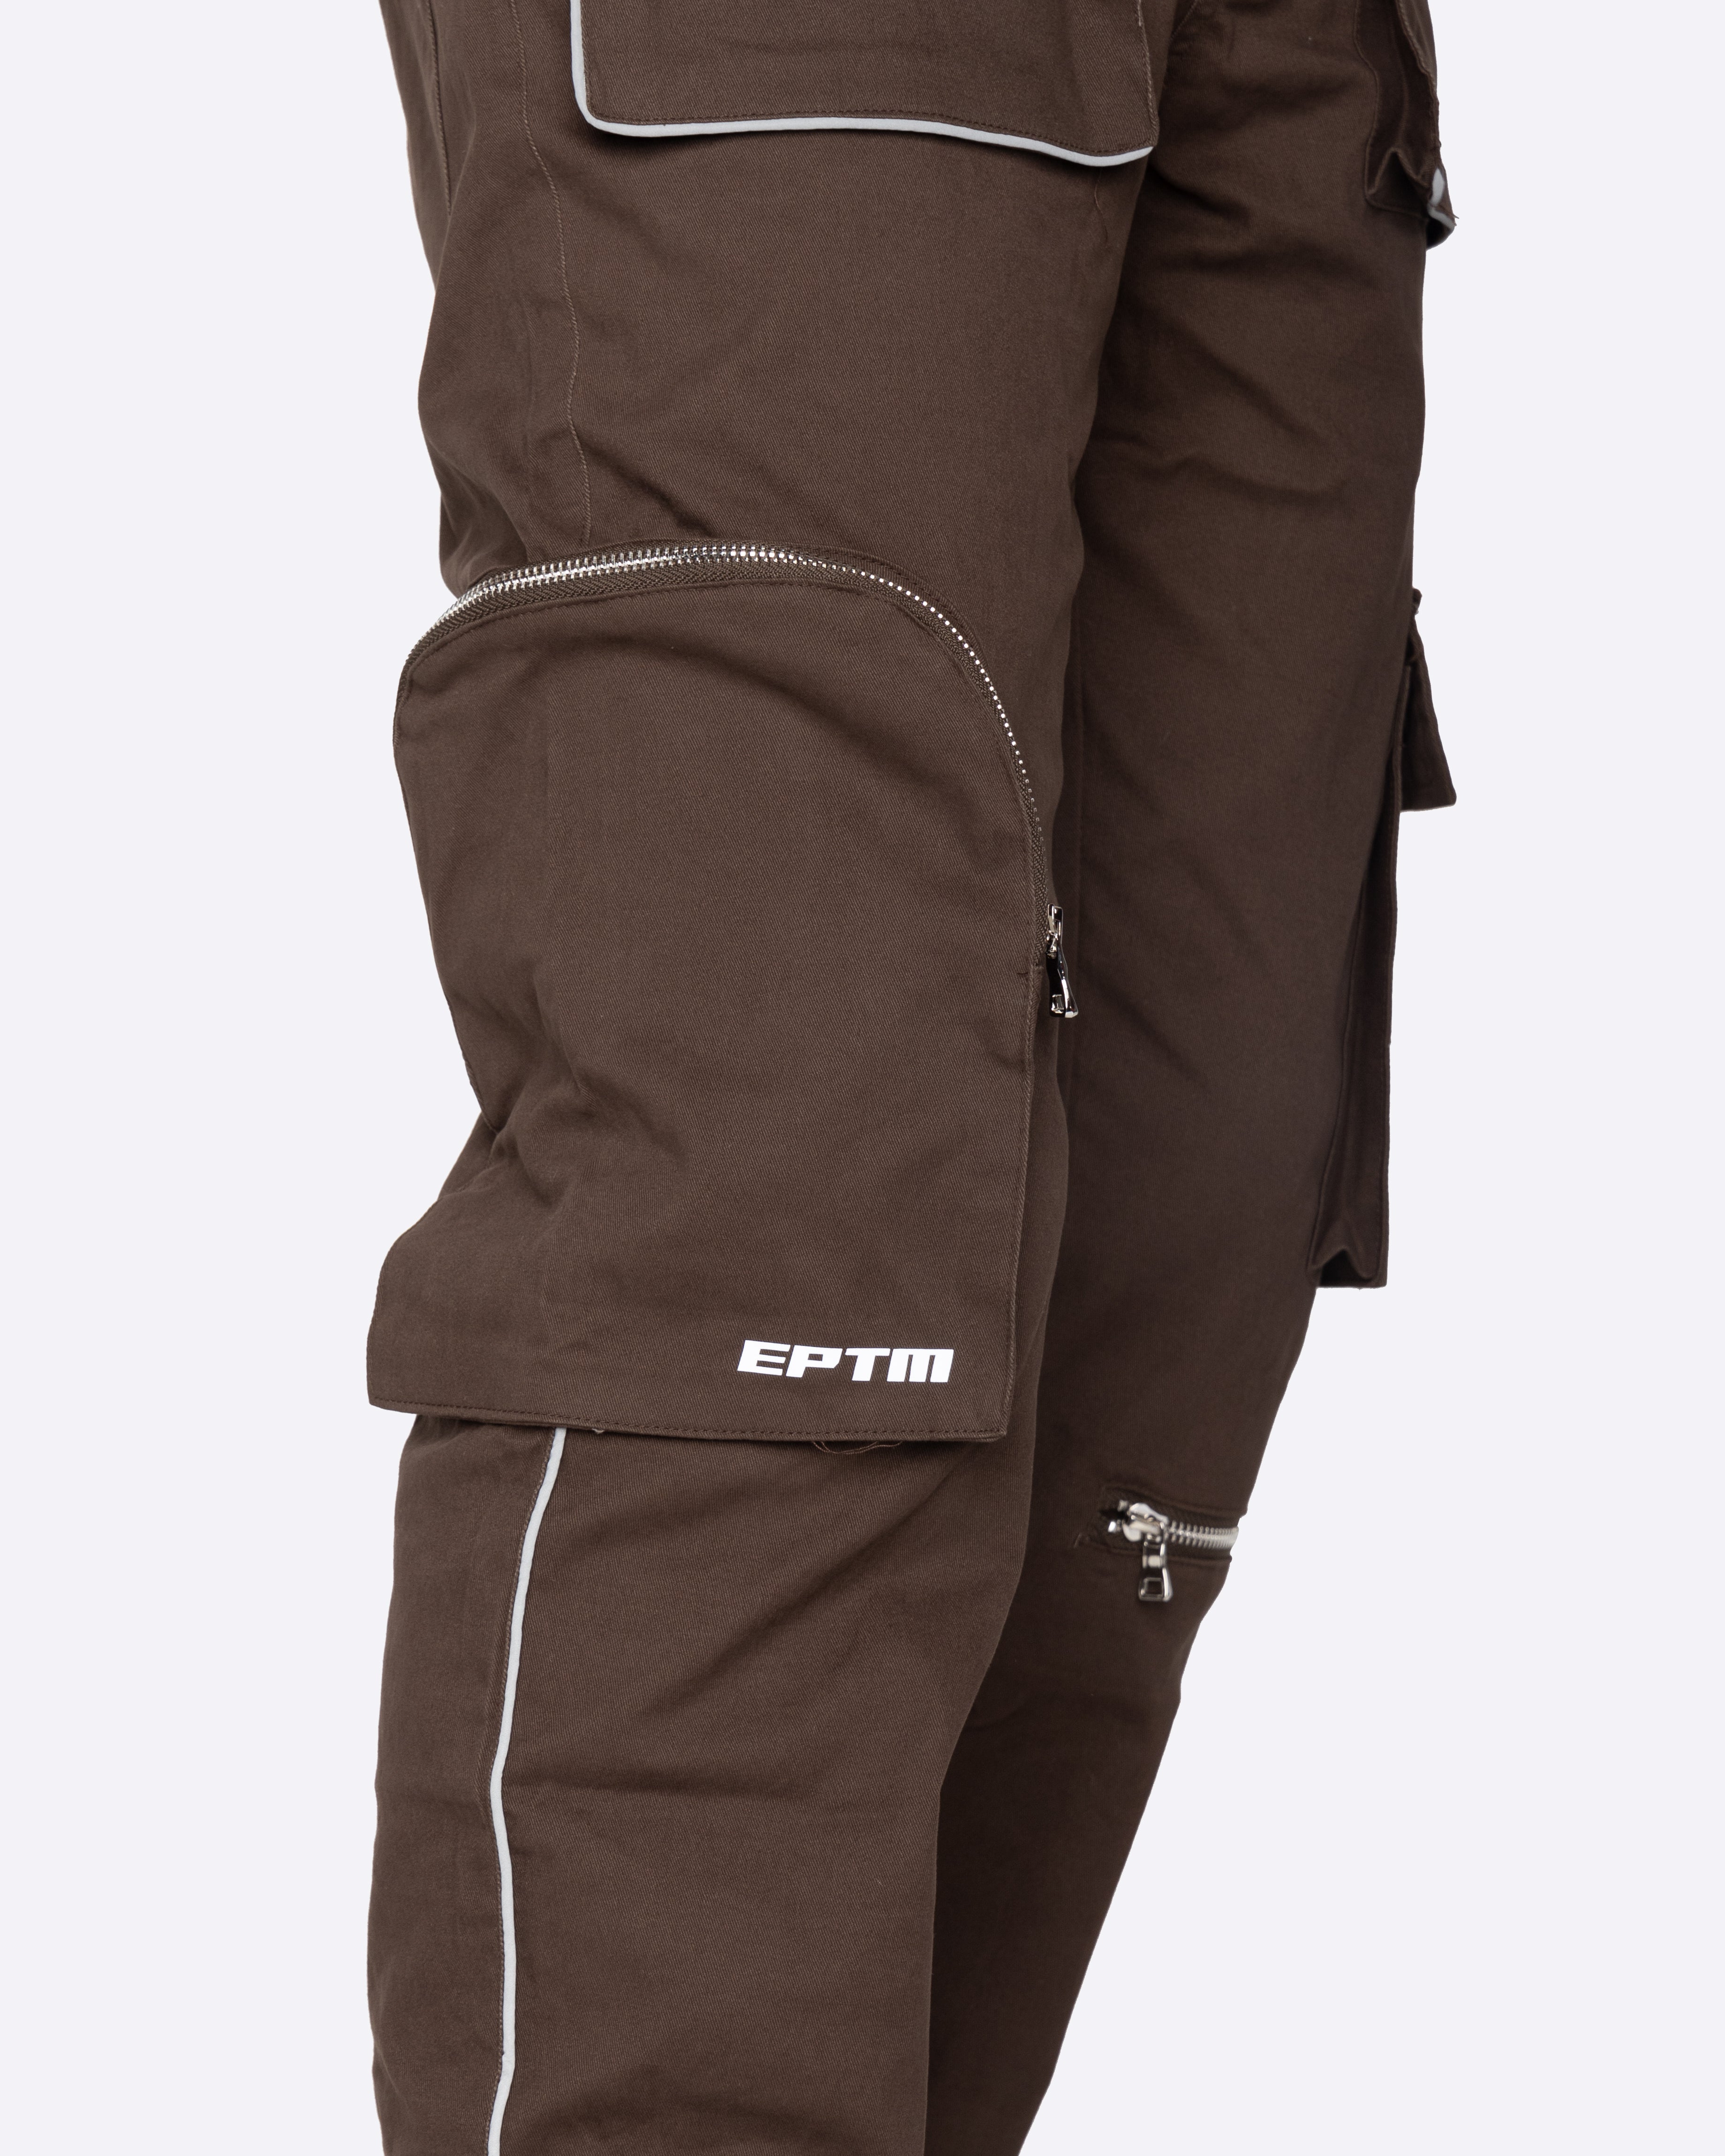 EPTM TWILL 3M PIPING CARGO PANTS-BROWN